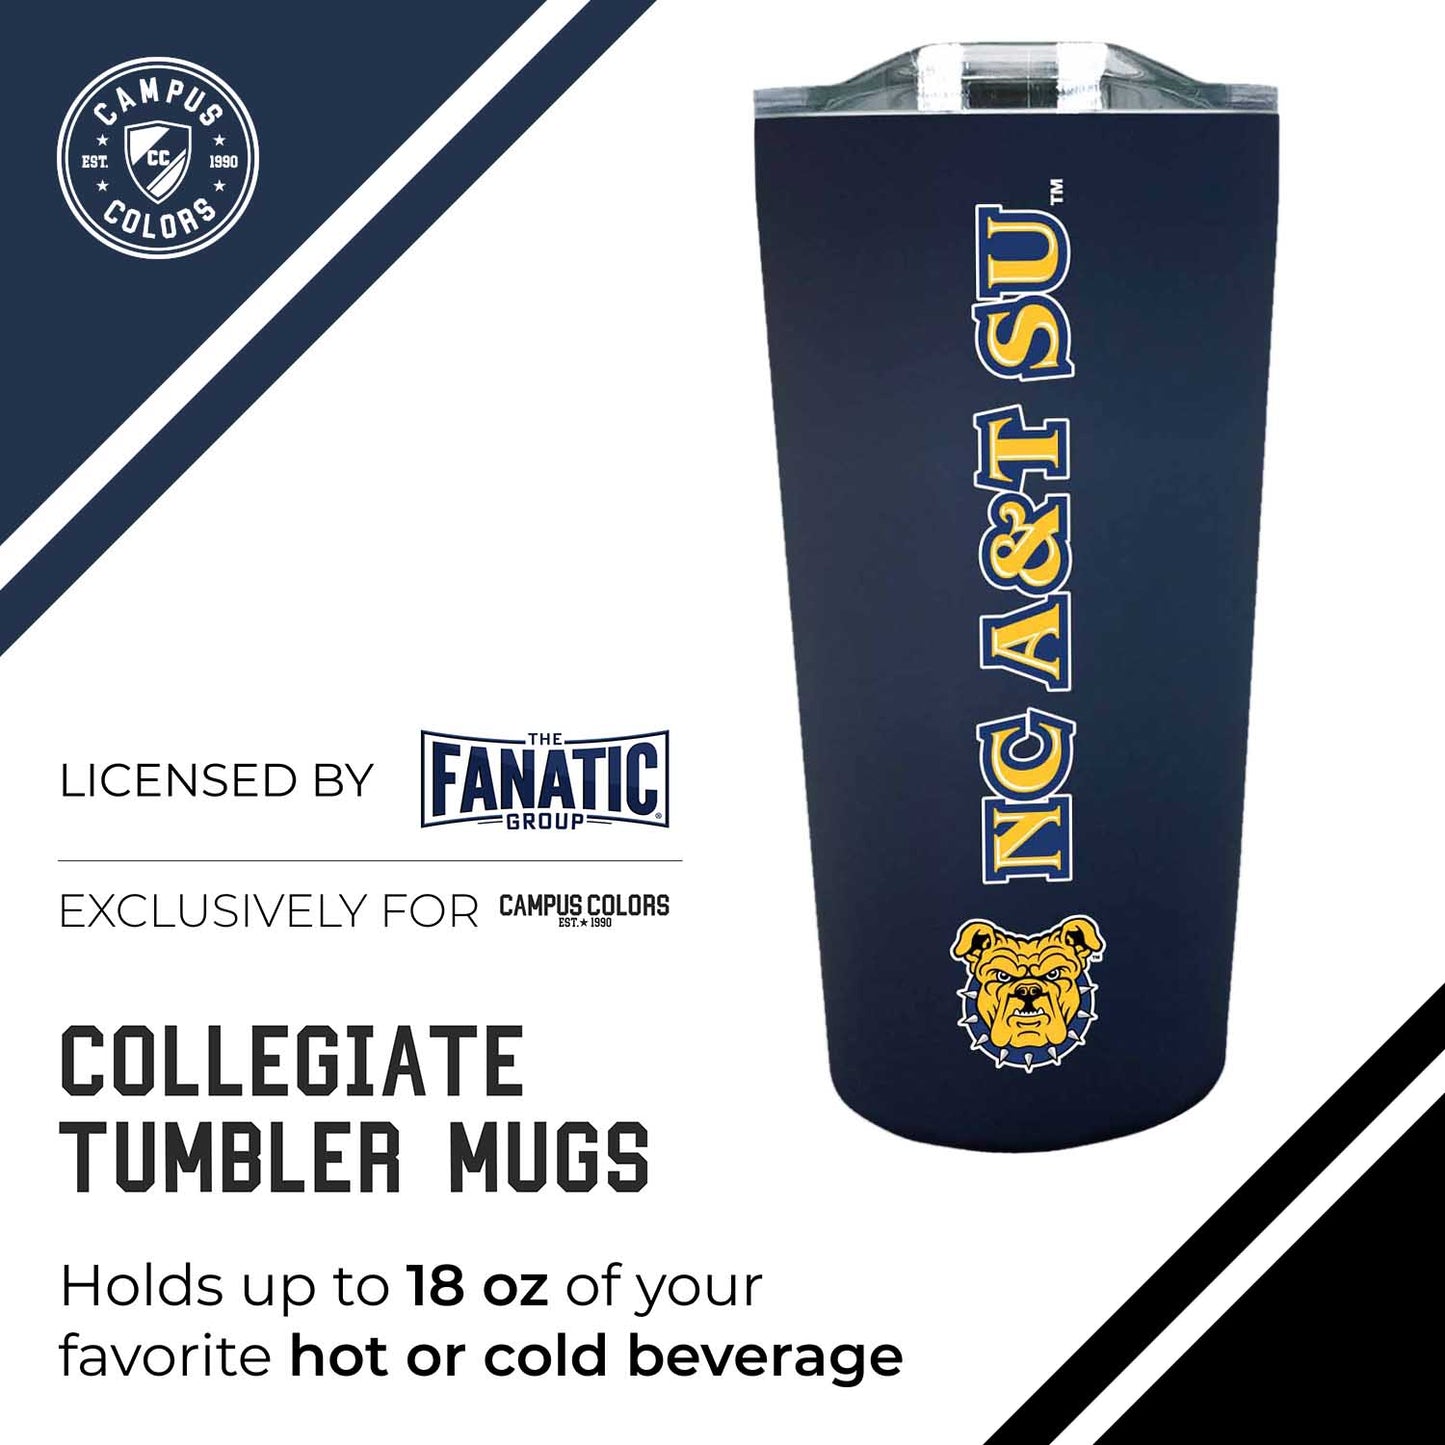 North Carolina A&T State University NCAA Stainless Steel Tumbler perfect for Gameday - Navy